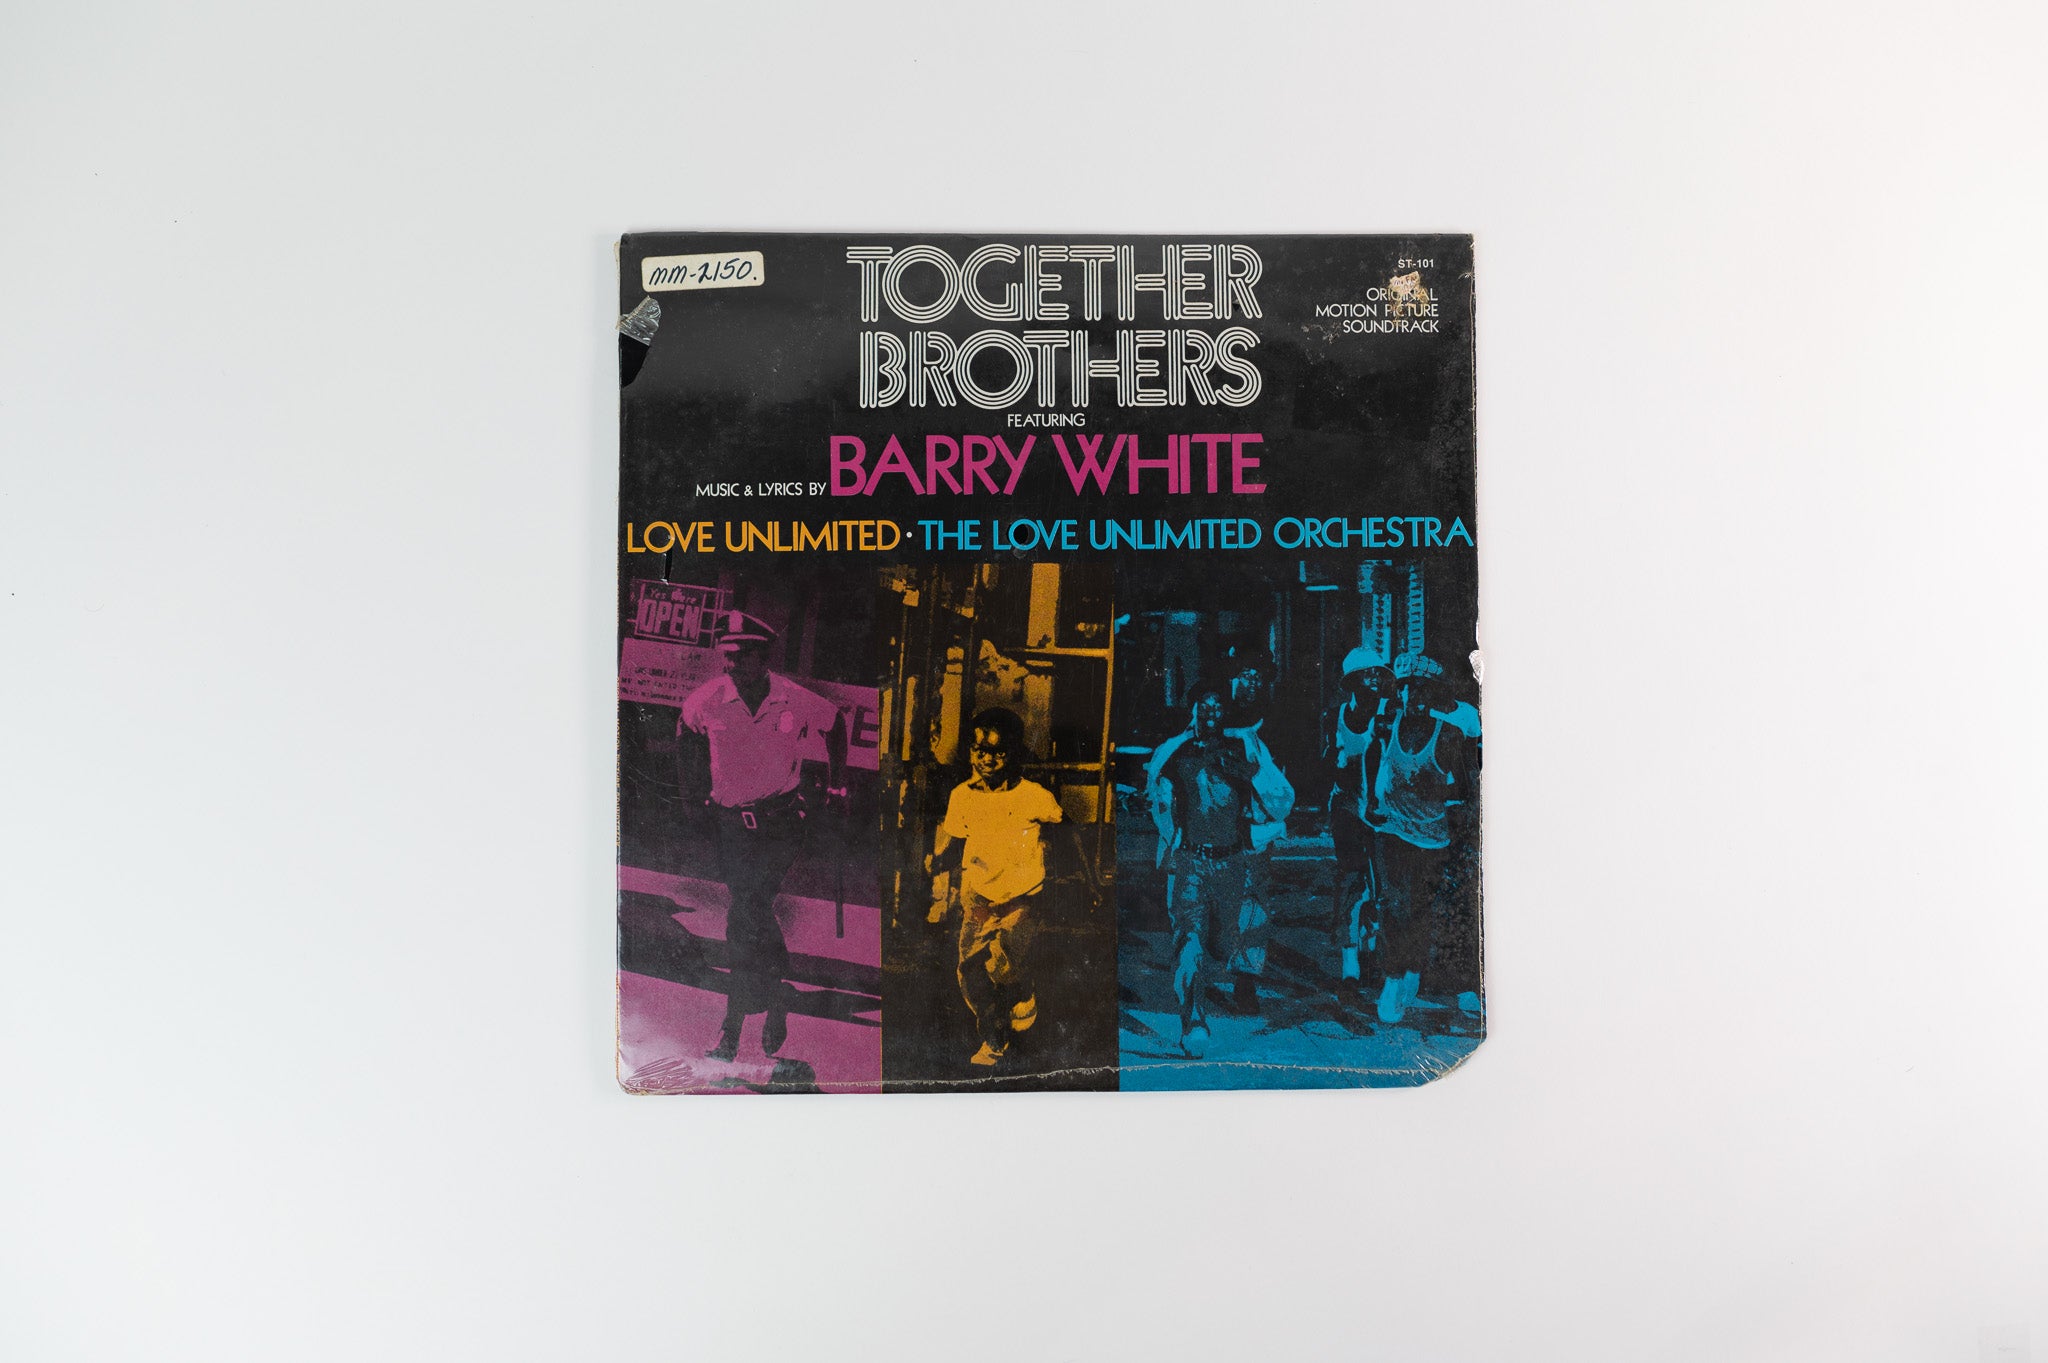 Barry White - Together Brothers (Original Soundtrack) on 20th Century Sealed